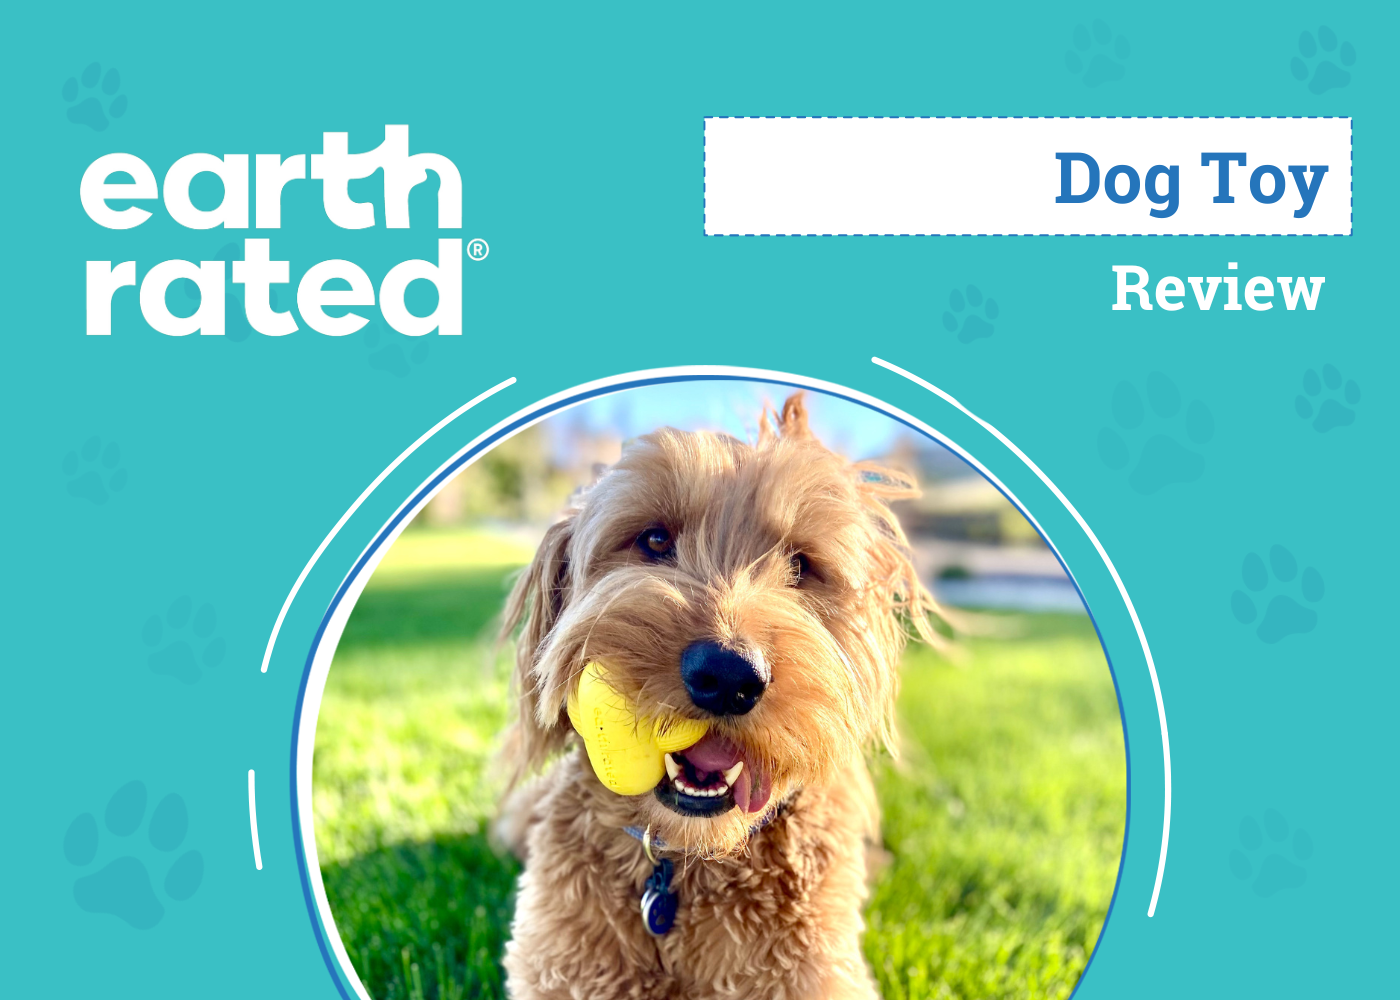 Earth rated Dog Toy